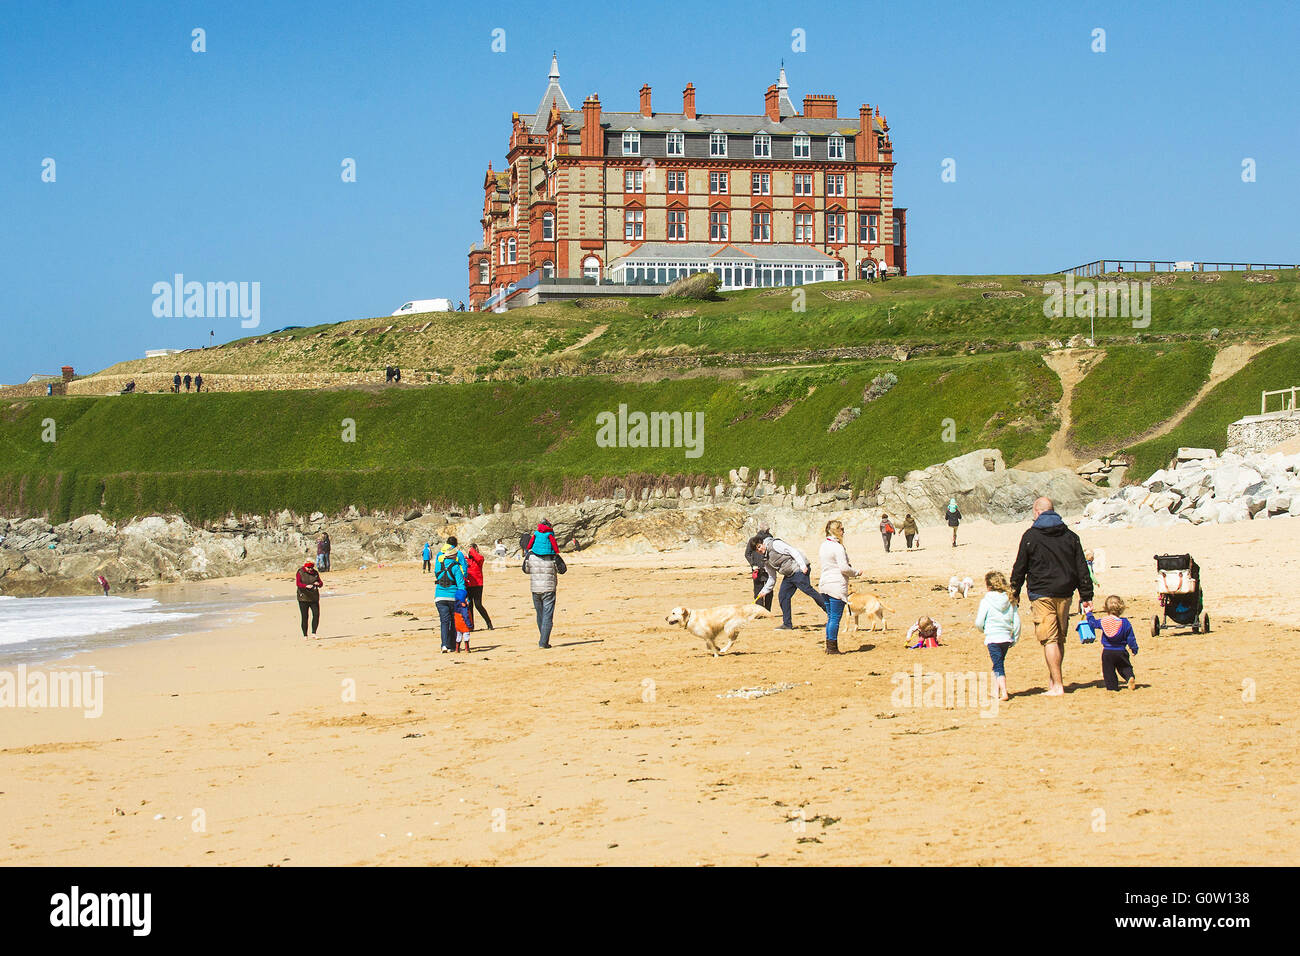 The Headland Hotel overlooking Fistral Beach in Newquay, Cornwall. Stock Photo